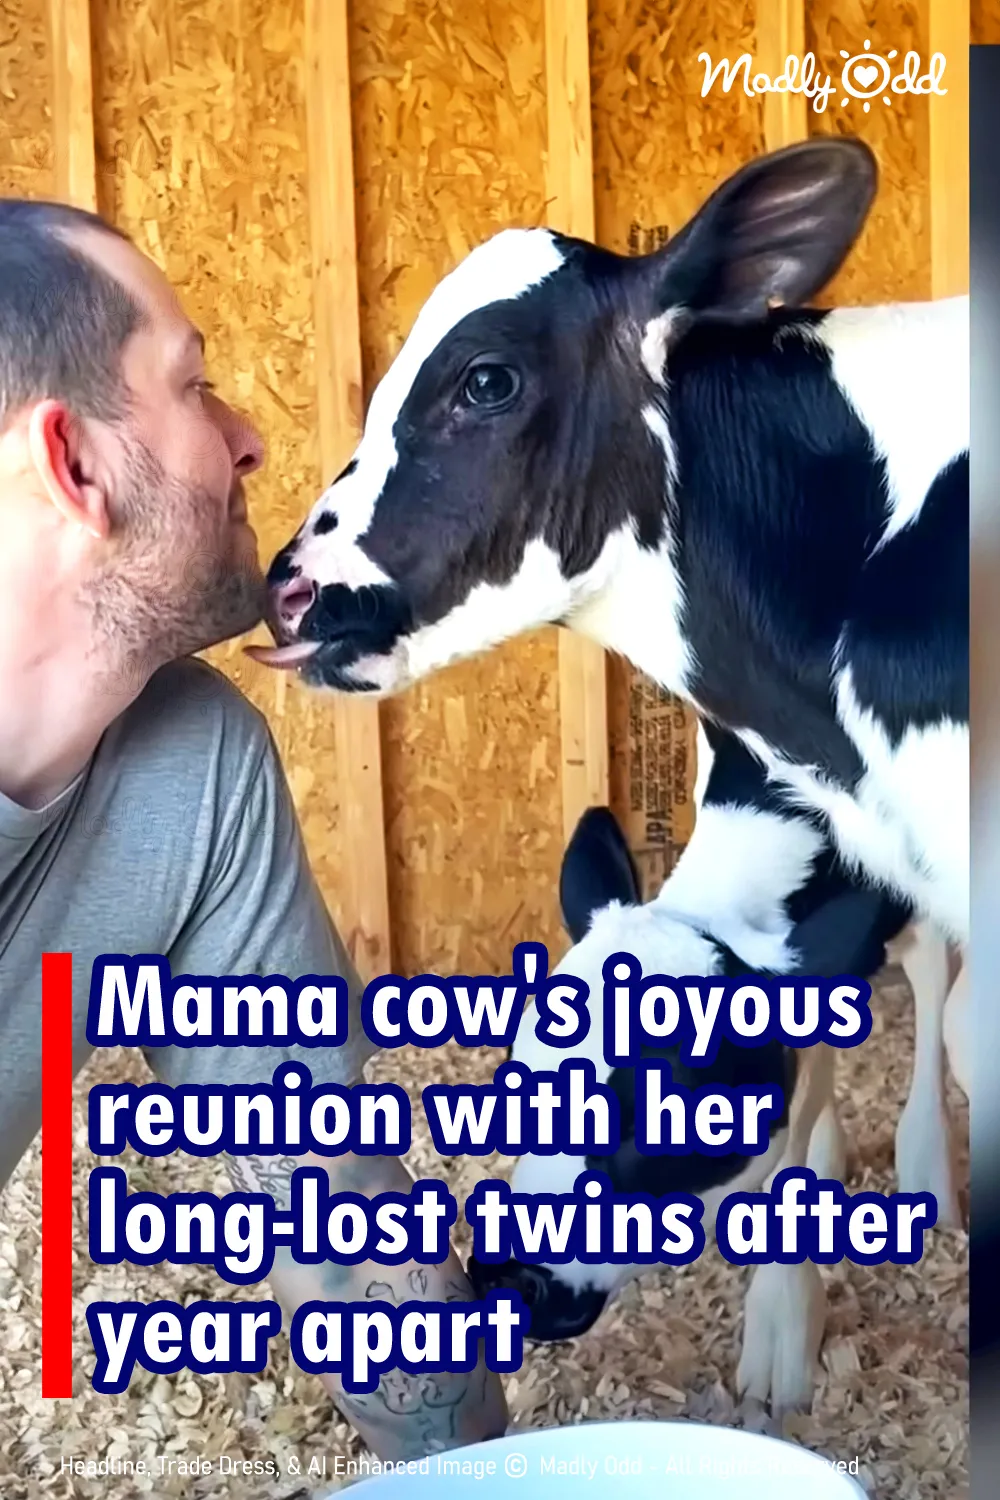 Mama cow\'s joyous reunion with long-lost twins after a year apart